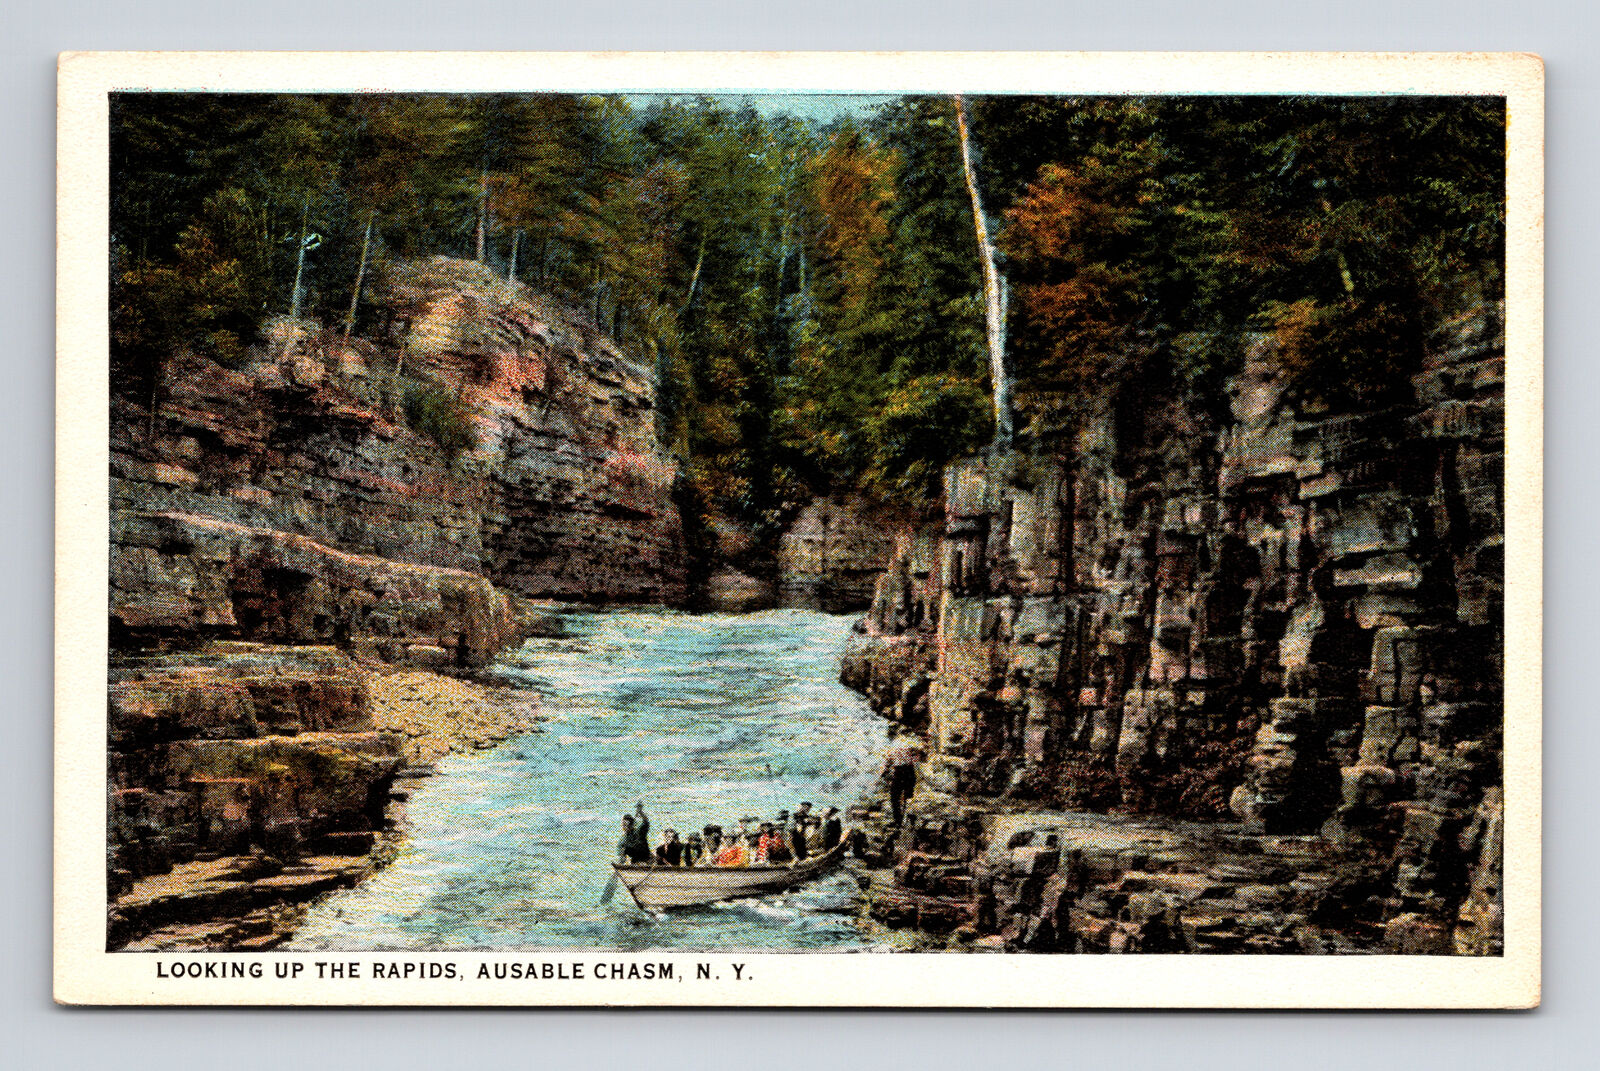 c1923 WB Postcard Ausable Chasm NY New York Early Boat Tour on River Rapids